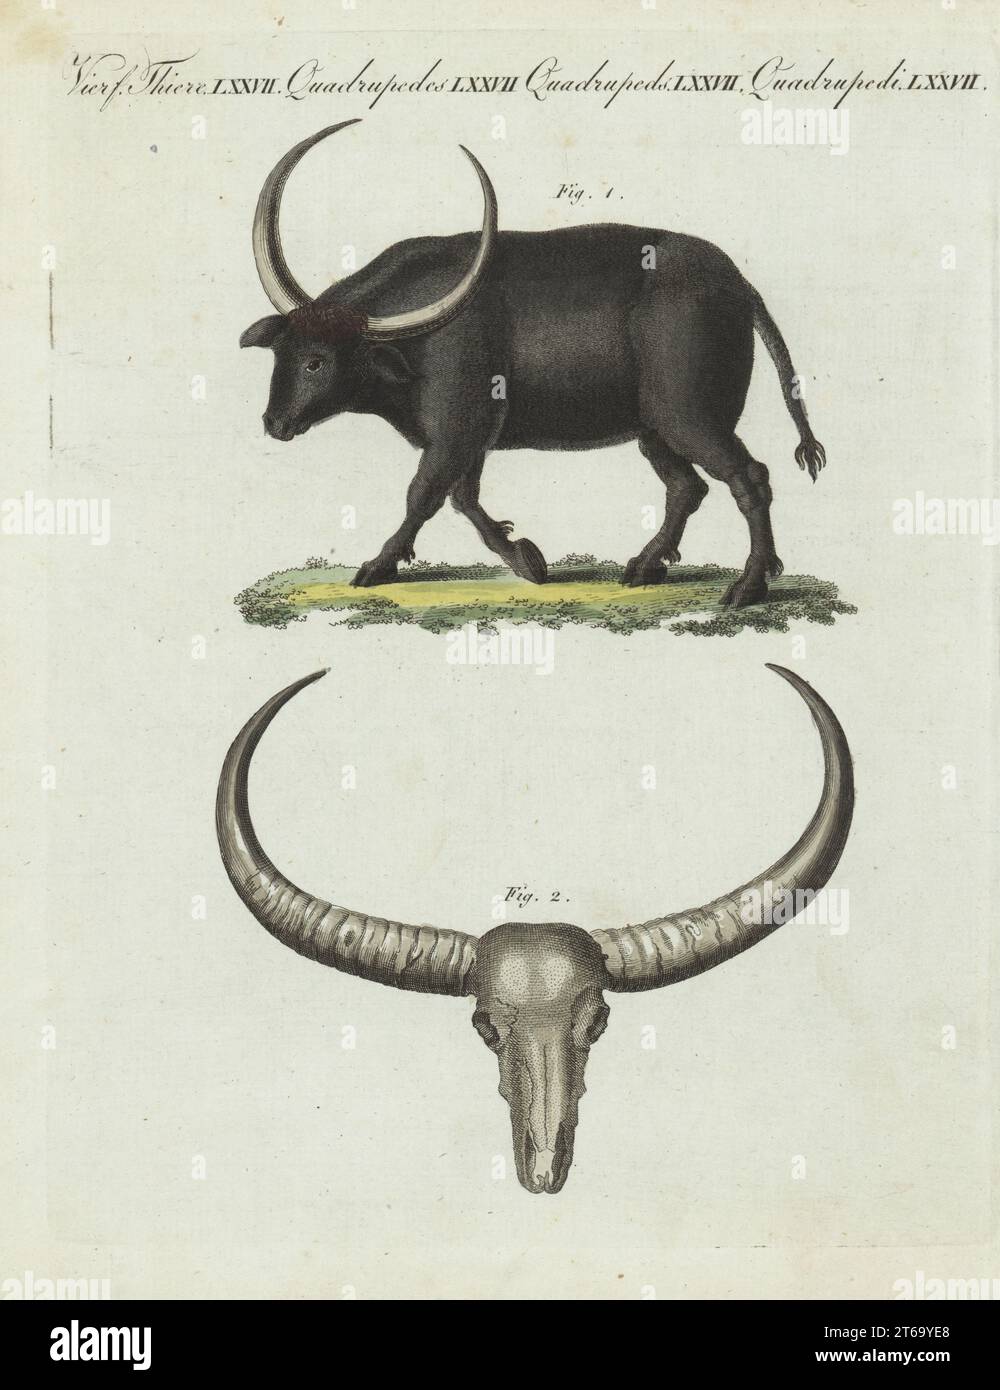 Wild water buffalo, Bubalus arnee, endangered 1. Skull and horns 2. Native to North Hindostan and North Bengal (India and Southeast Asia). The gigantic buffalo, Bos arni. Handcoloured copperplate engraving from Carl Bertuch's Bilderbuch fur Kinder (Picture Book for Children), Weimar, 1810. A 12-volume encyclopedia for children illustrated with almost 1,200 engraved plates on natural history, science, costume, mythology, etc., published from 1790-1830. Stock Photo